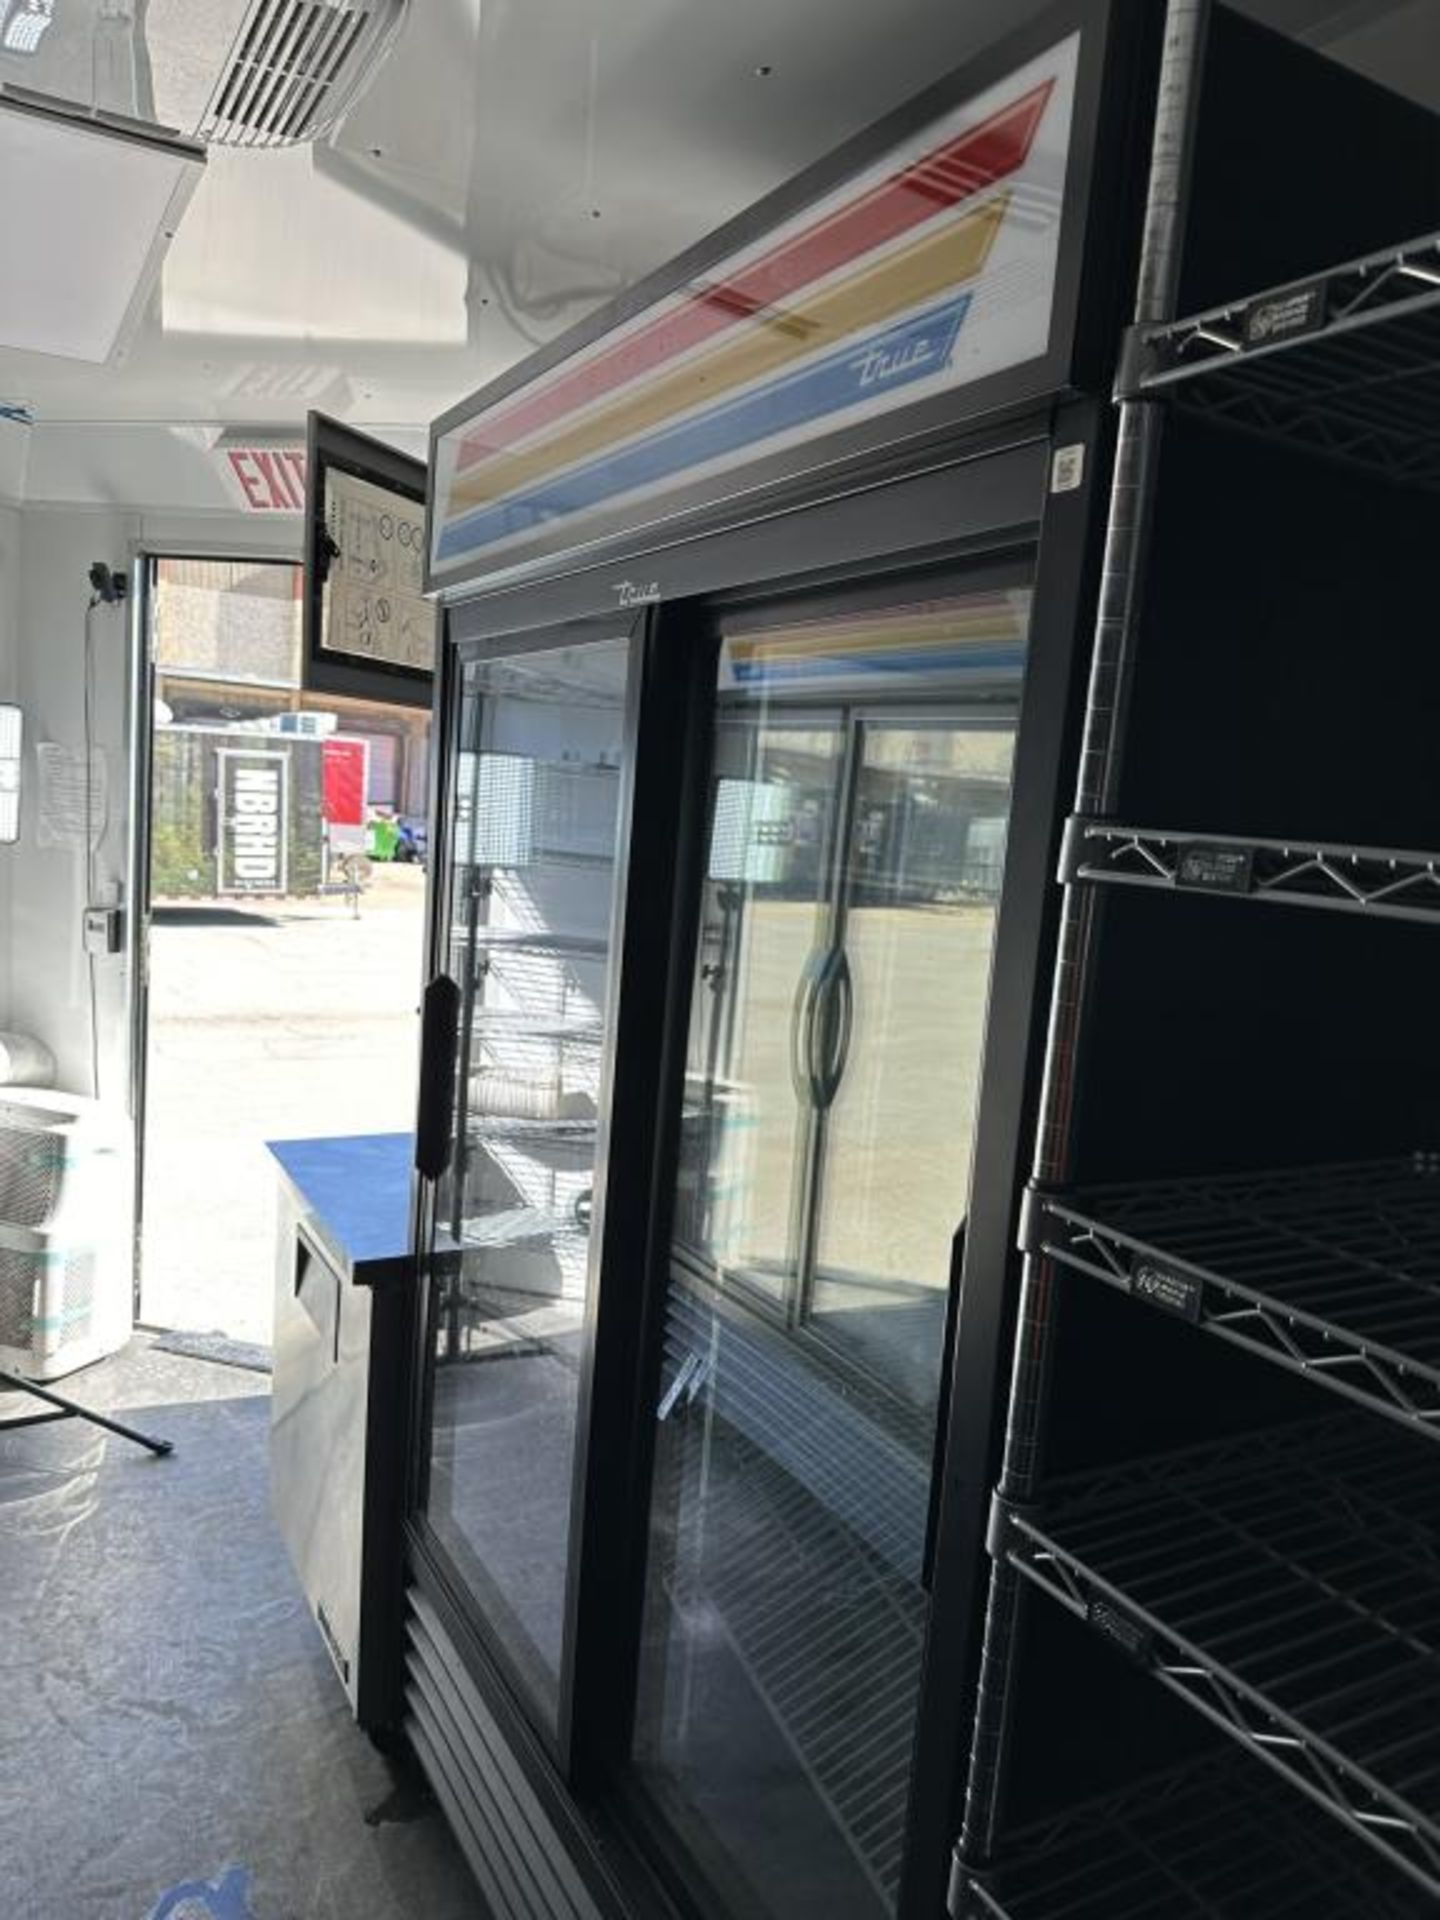 2021 Food Service Support Trailer - Image 19 of 22